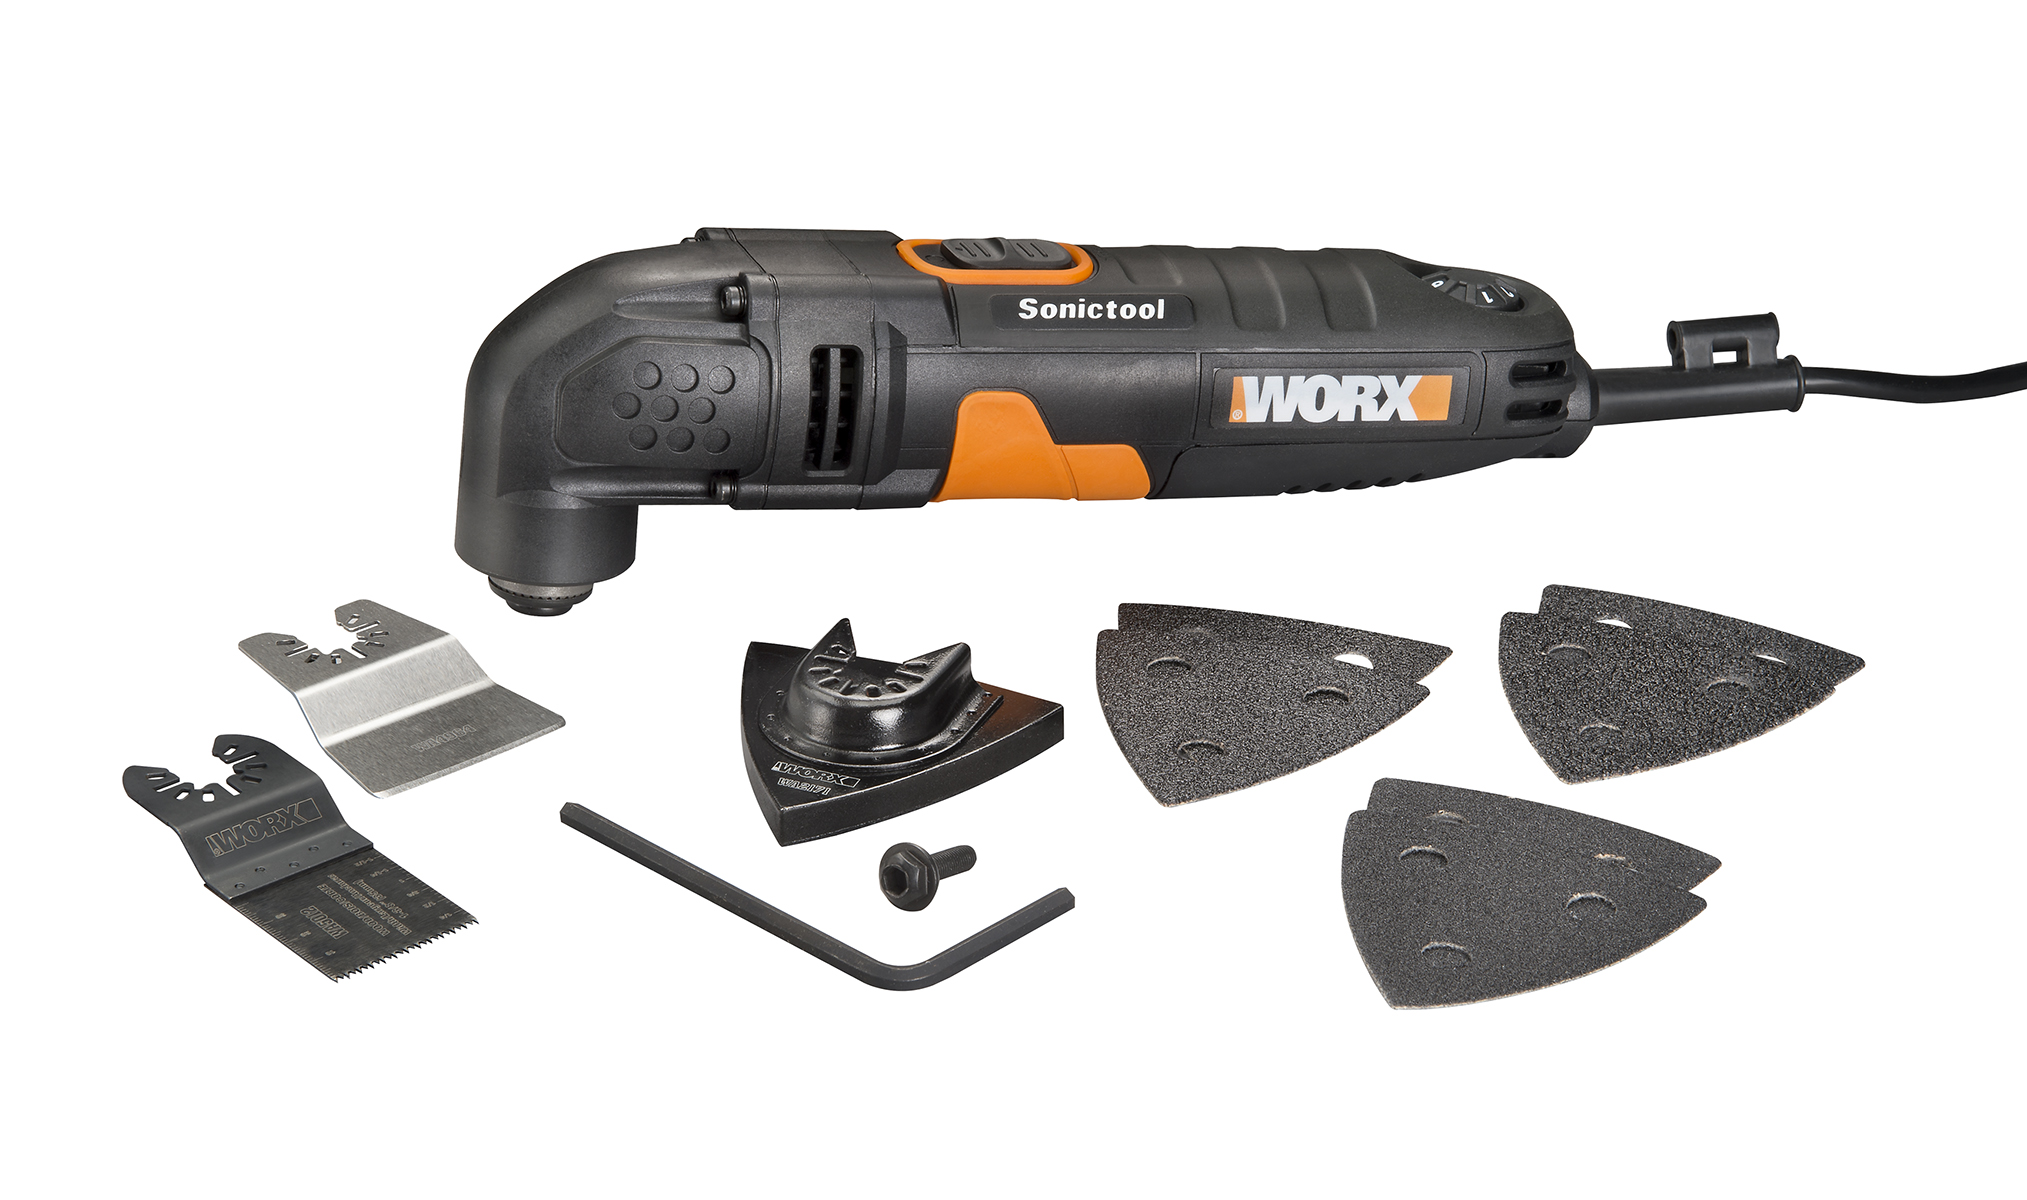 WORX 3.0 Amp Oscillating Tool with 9 Accessories includes a 1-3/8  inch standard wood end-cut blade, sanding pad, rigid scraper, six sanding sheets and Allen key.